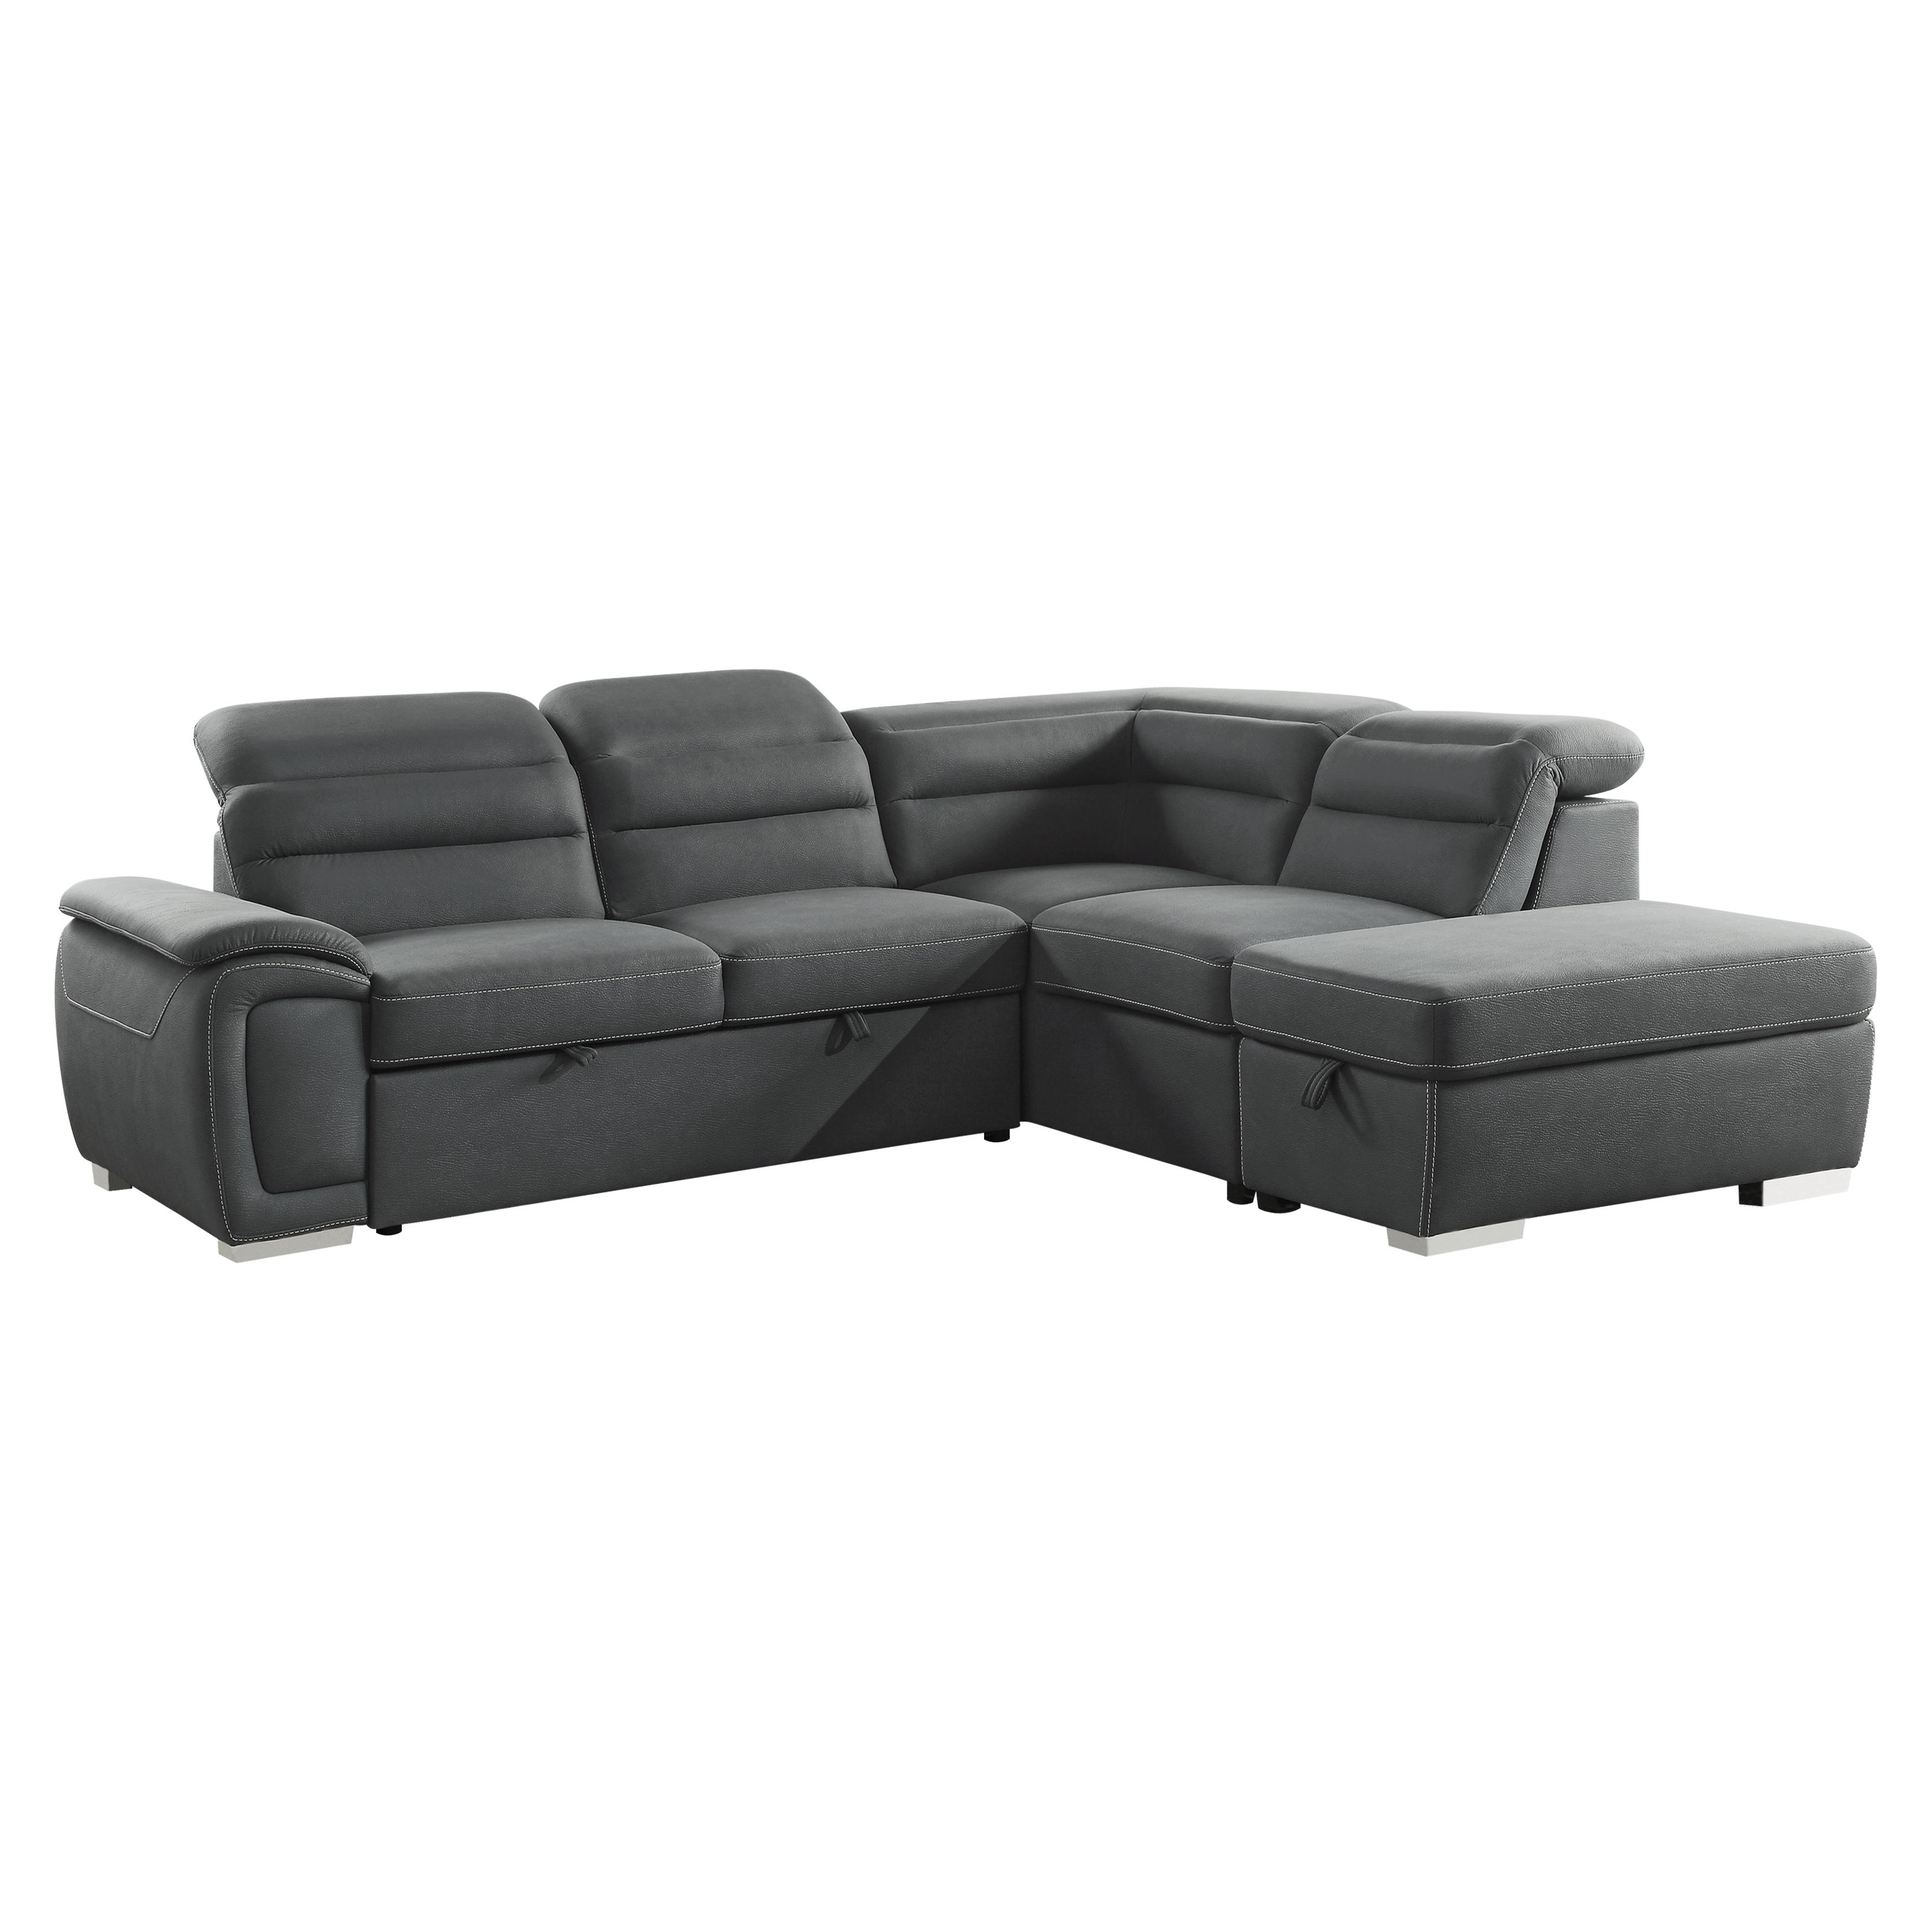 

    
Contemporary Gray Microfiber RHC 3-Piece Sectional Homelegance 8277NGY* Platina
